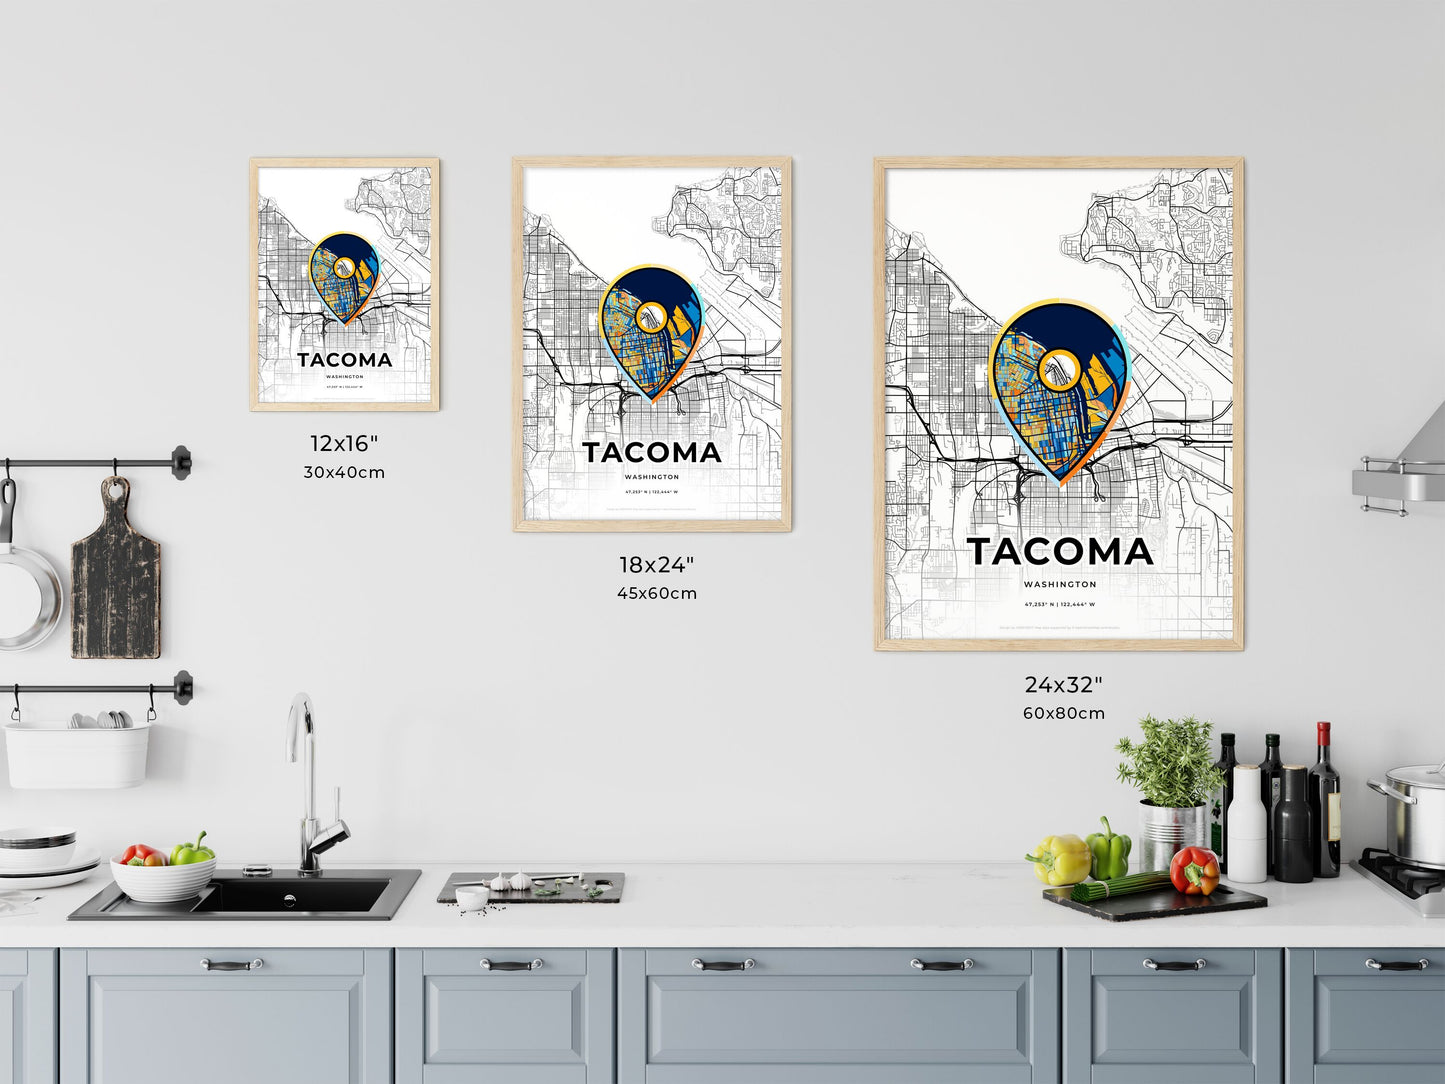 TACOMA WASHINGTON minimal art map with a colorful icon. Where it all began, Couple map gift.